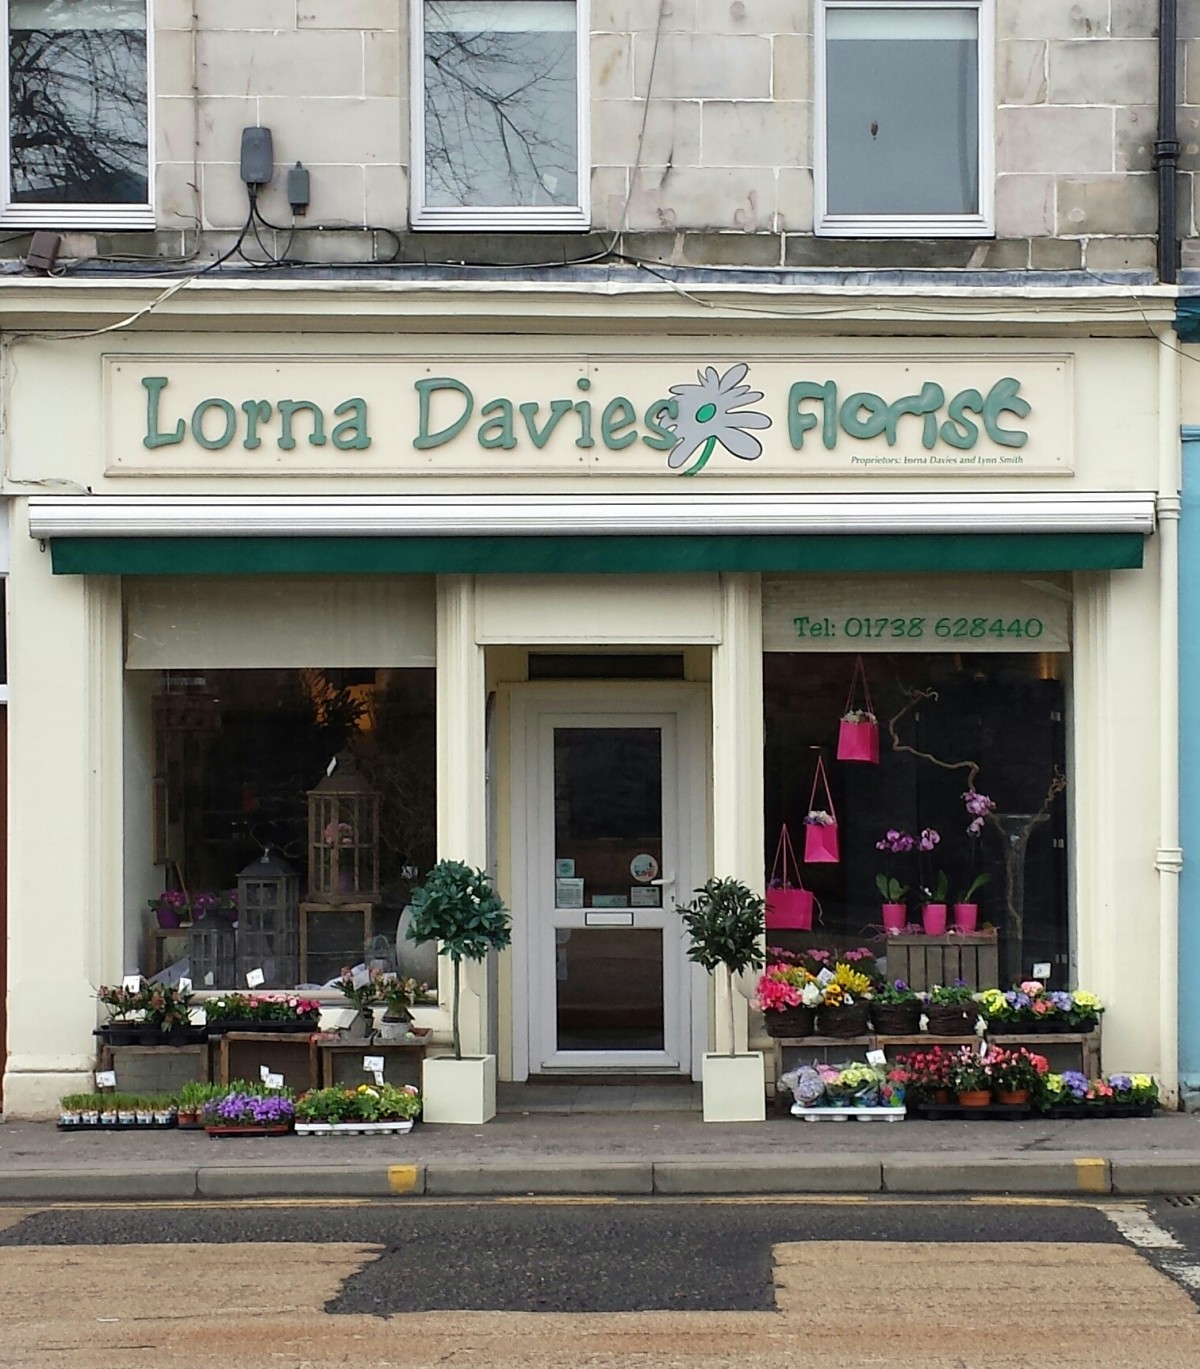 Lorna Davies is one of the leading florists in Perth and offers a range of services from weddings, special occasions and funerals they can make and deliver a bouquet for any occasion.